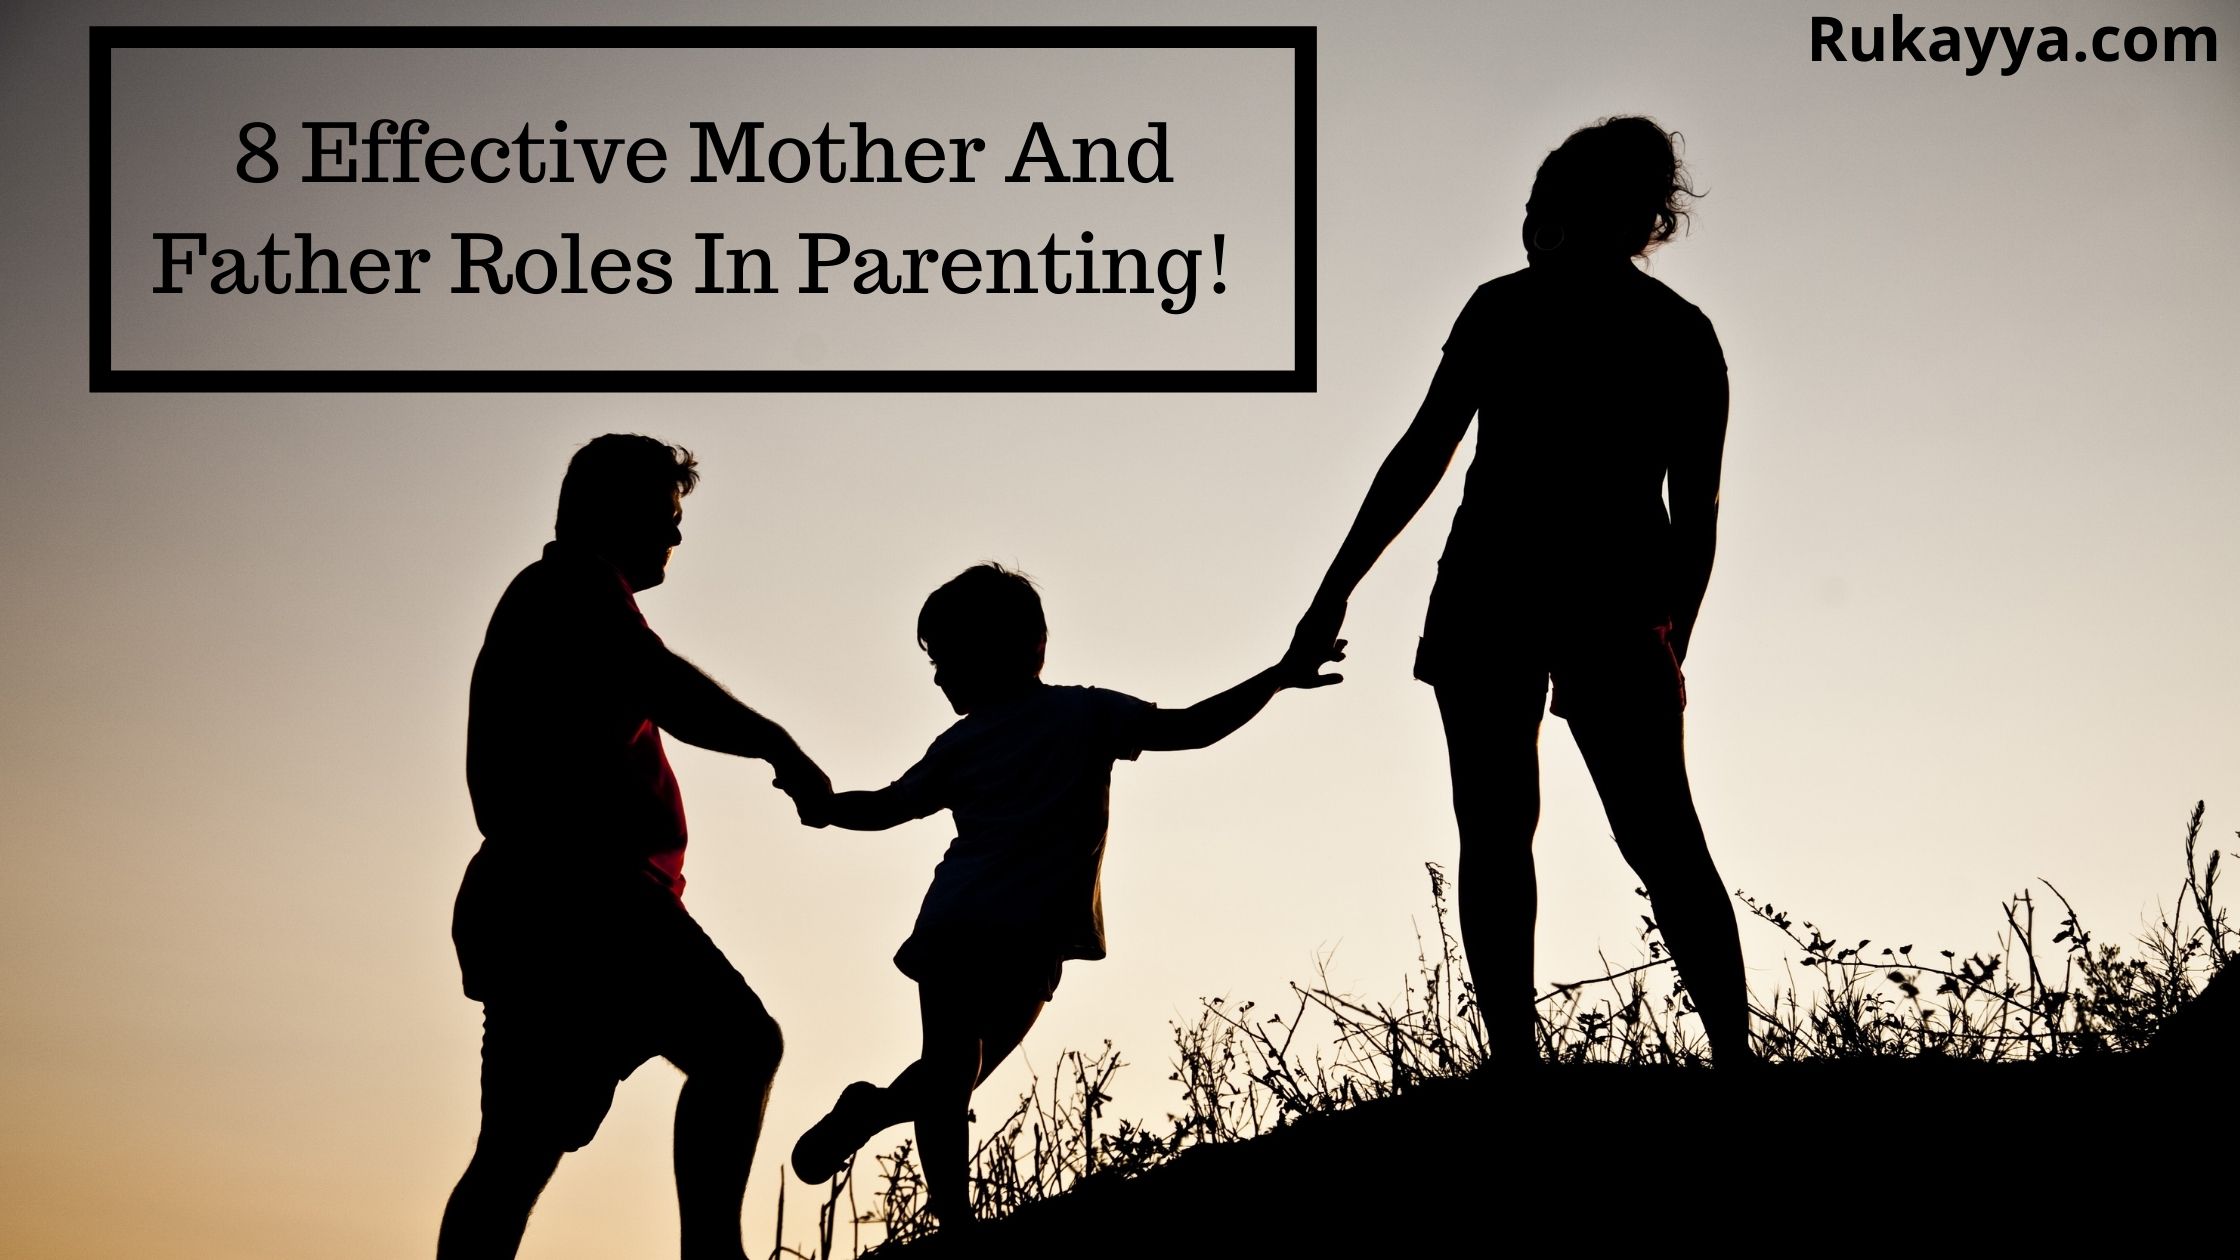 8 Effective Mother And Father Roles In Parenting